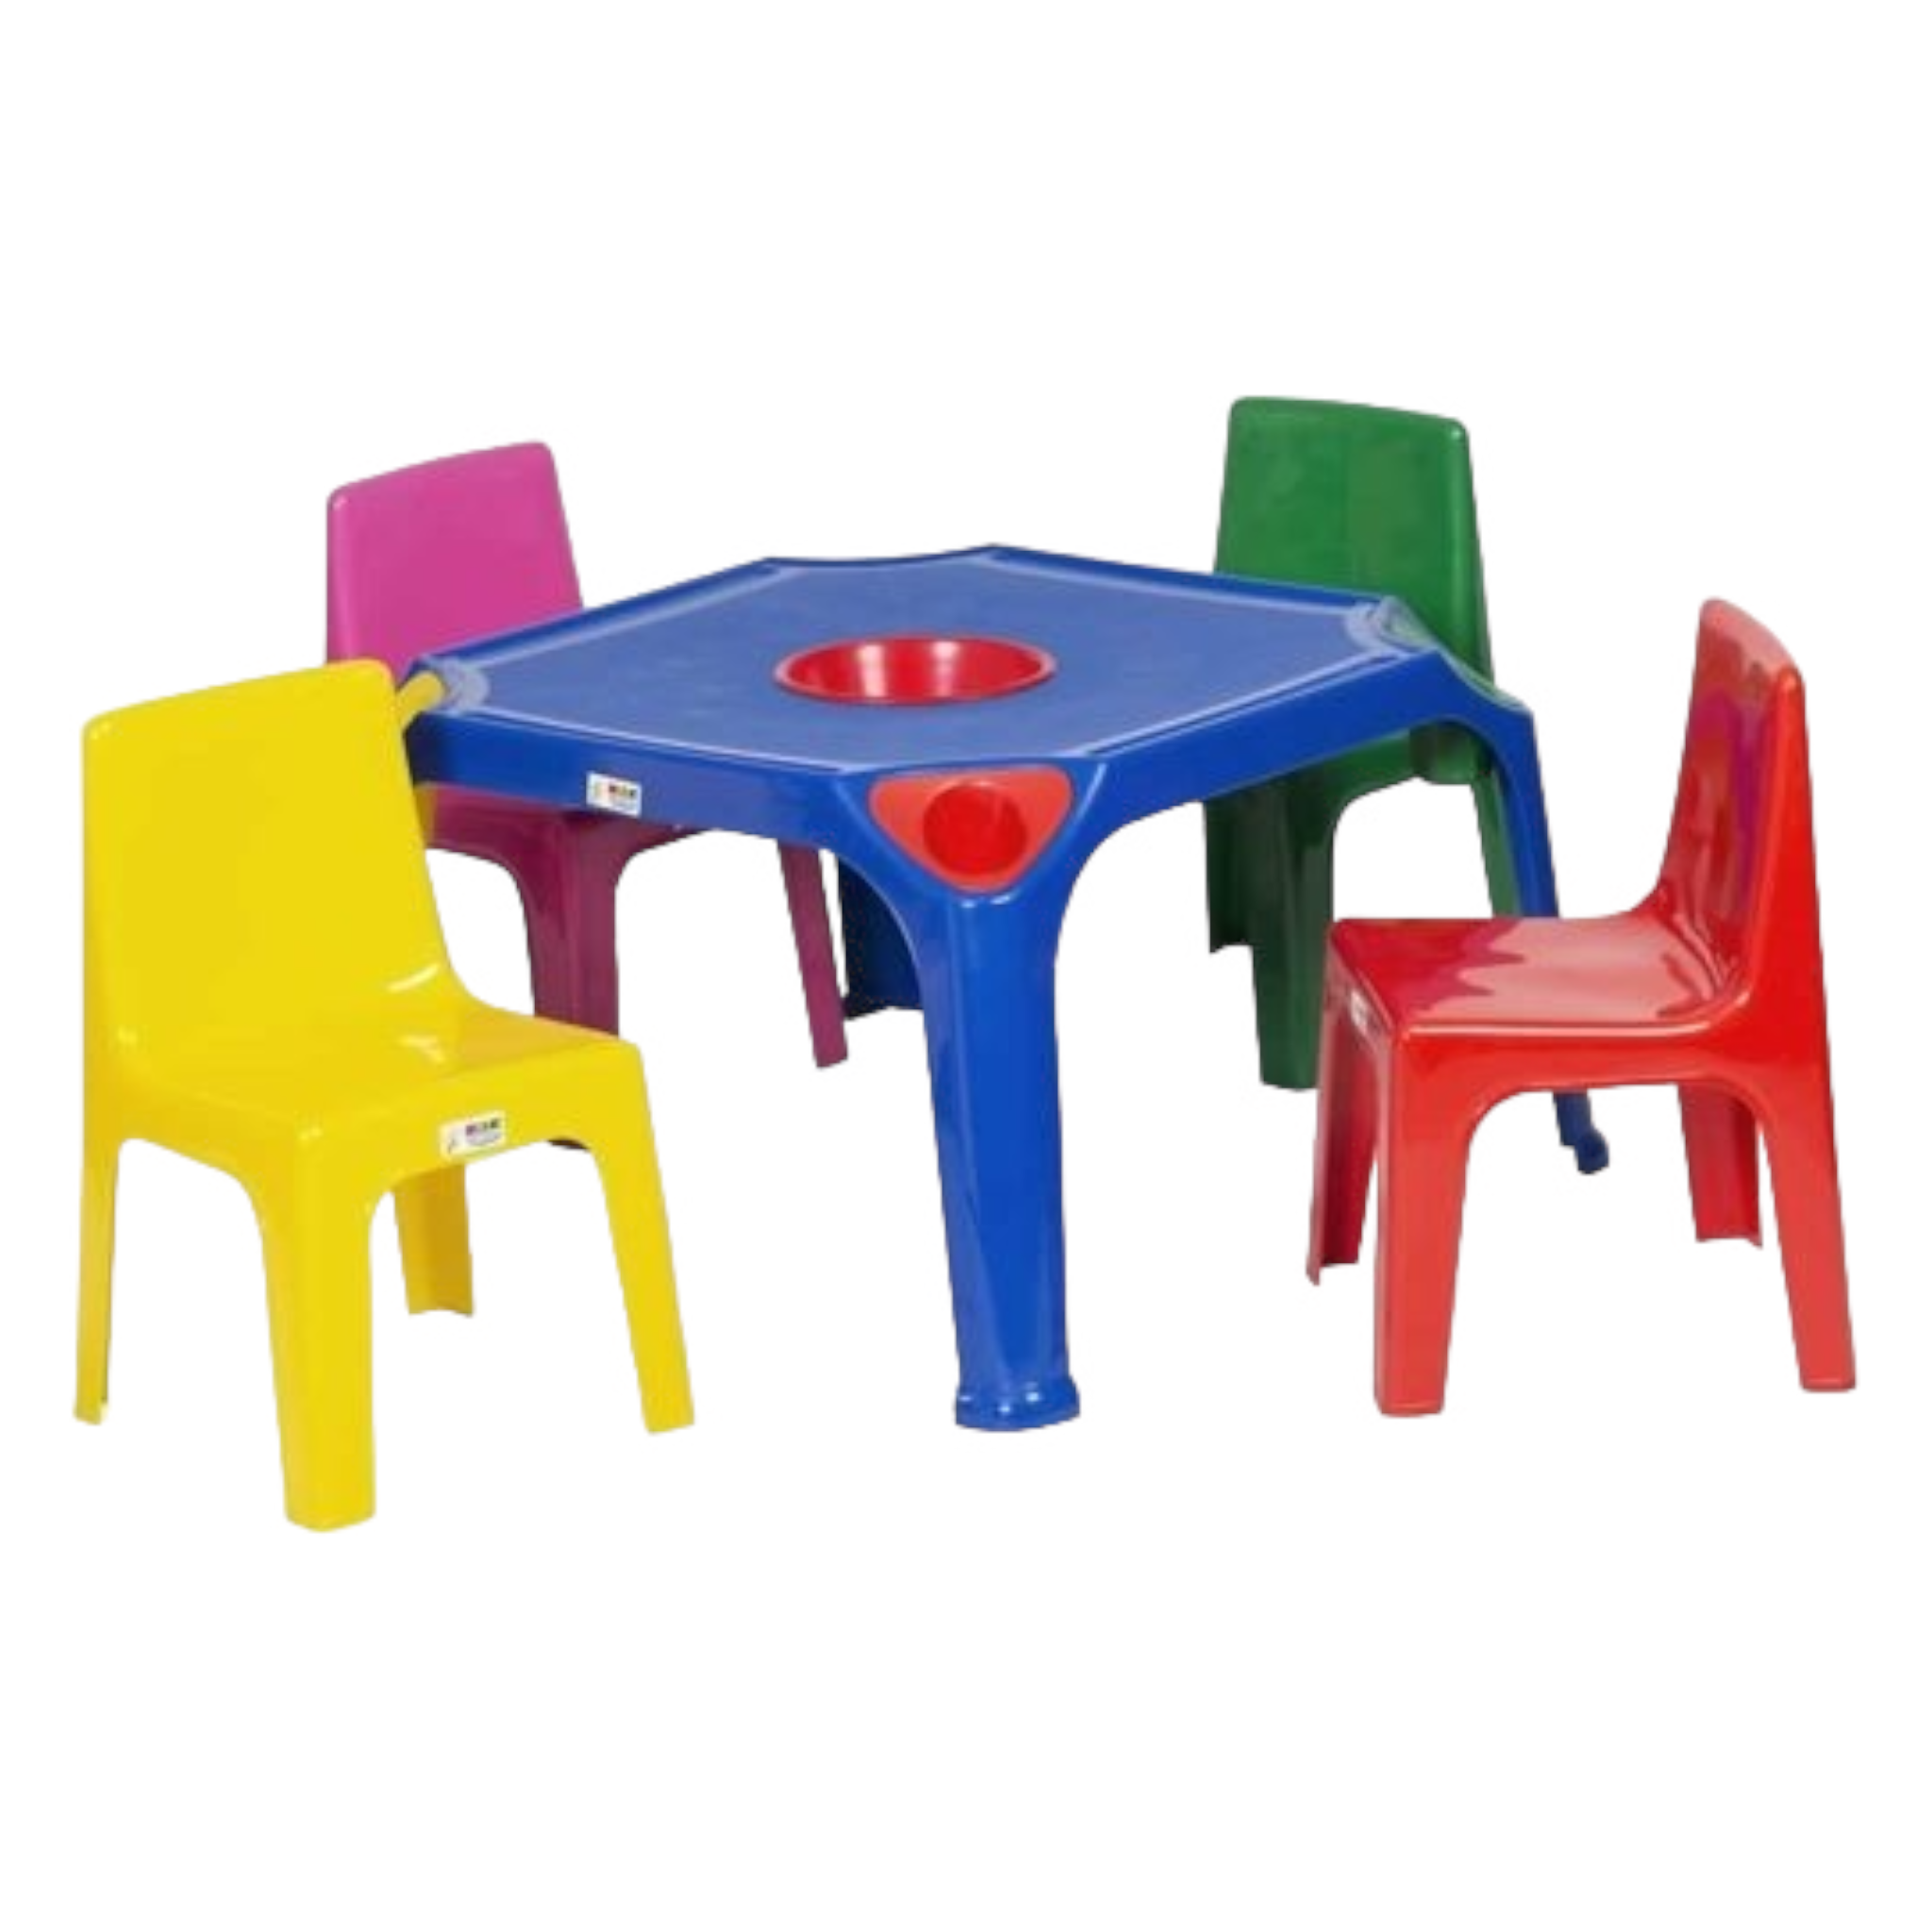 Kiddies Plastic Table With Hole Buzz Kids